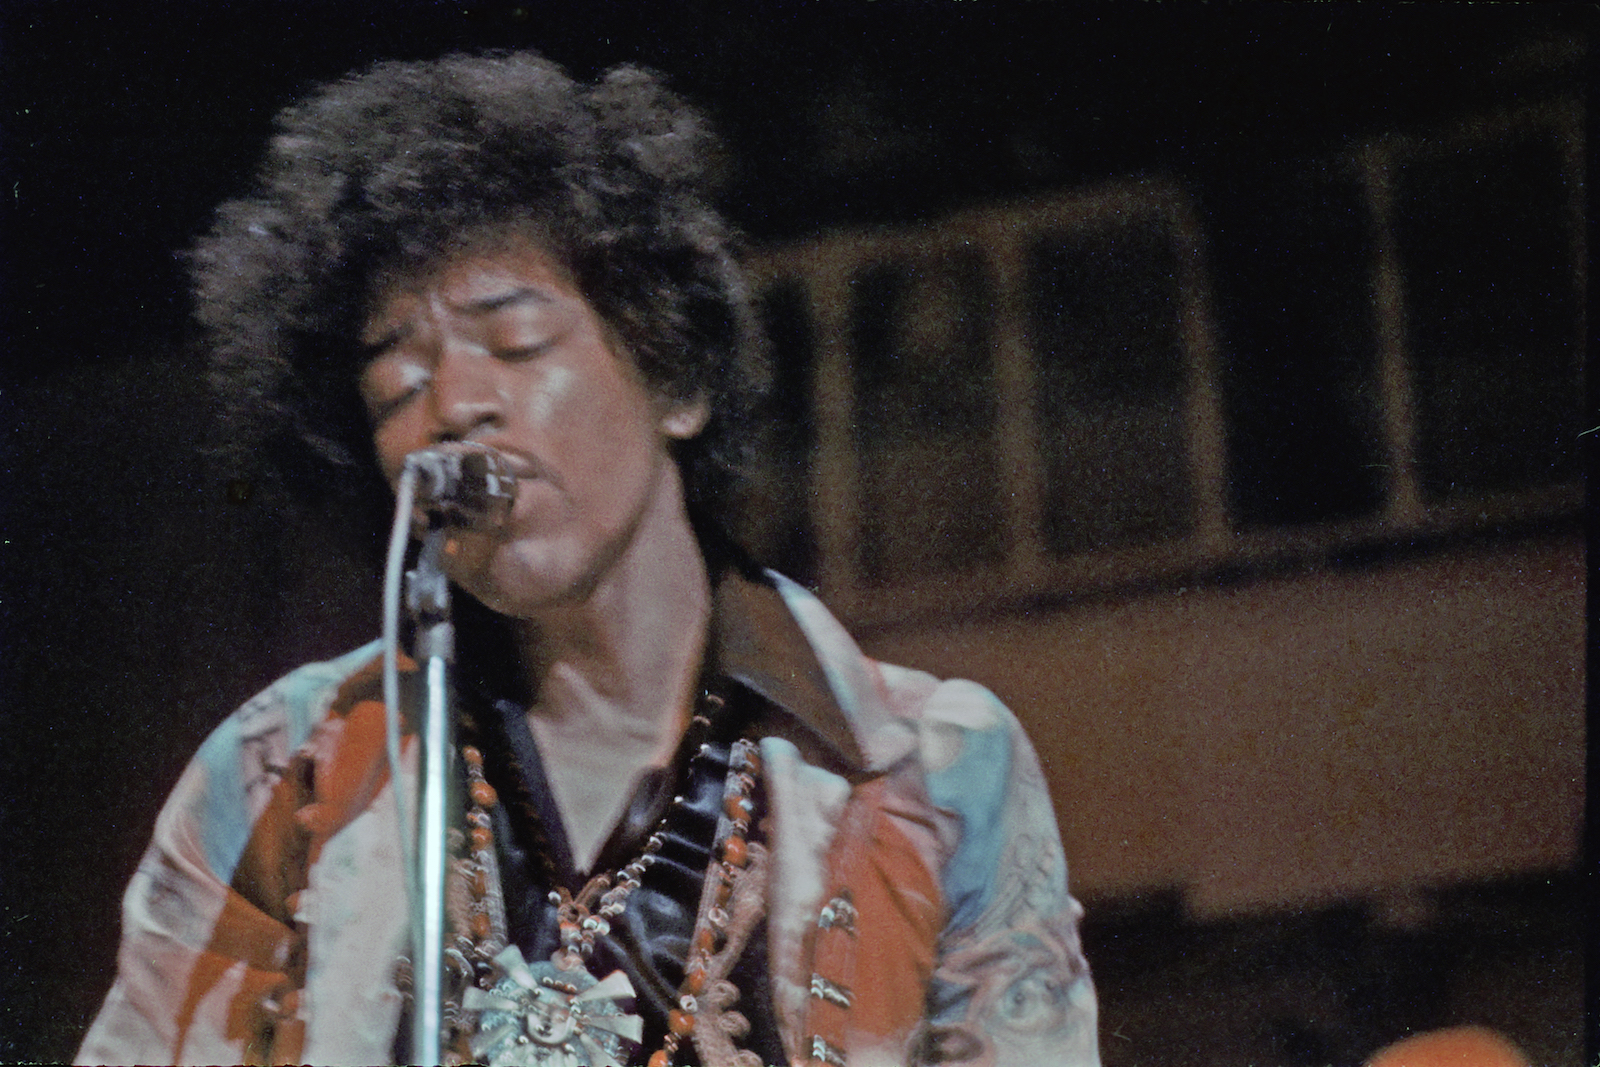 Jimi Hendrix, who had a rough childhood, singing into a microphone